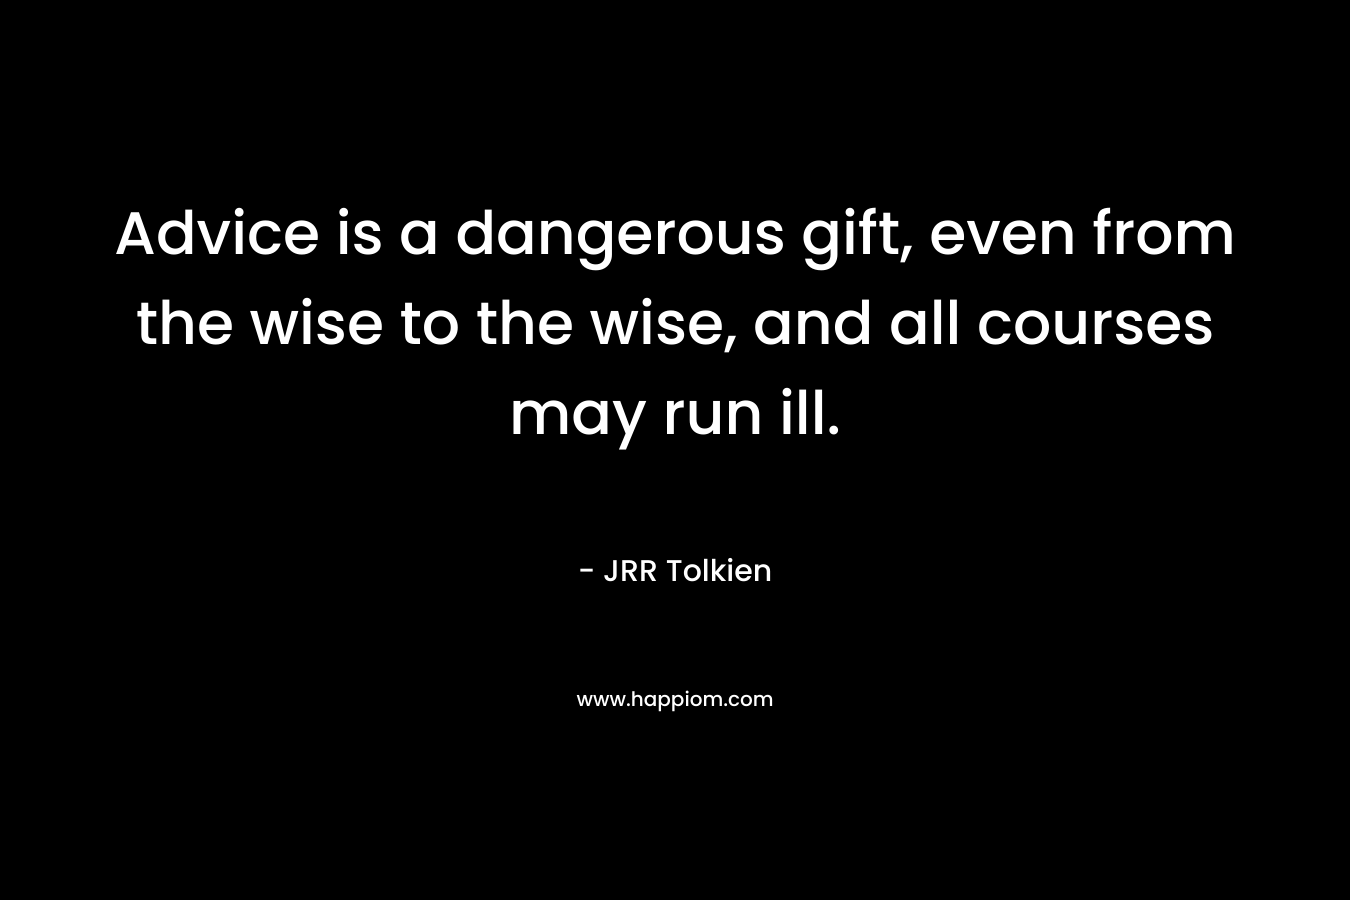 Advice is a dangerous gift, even from the wise to the wise, and all courses may run ill.